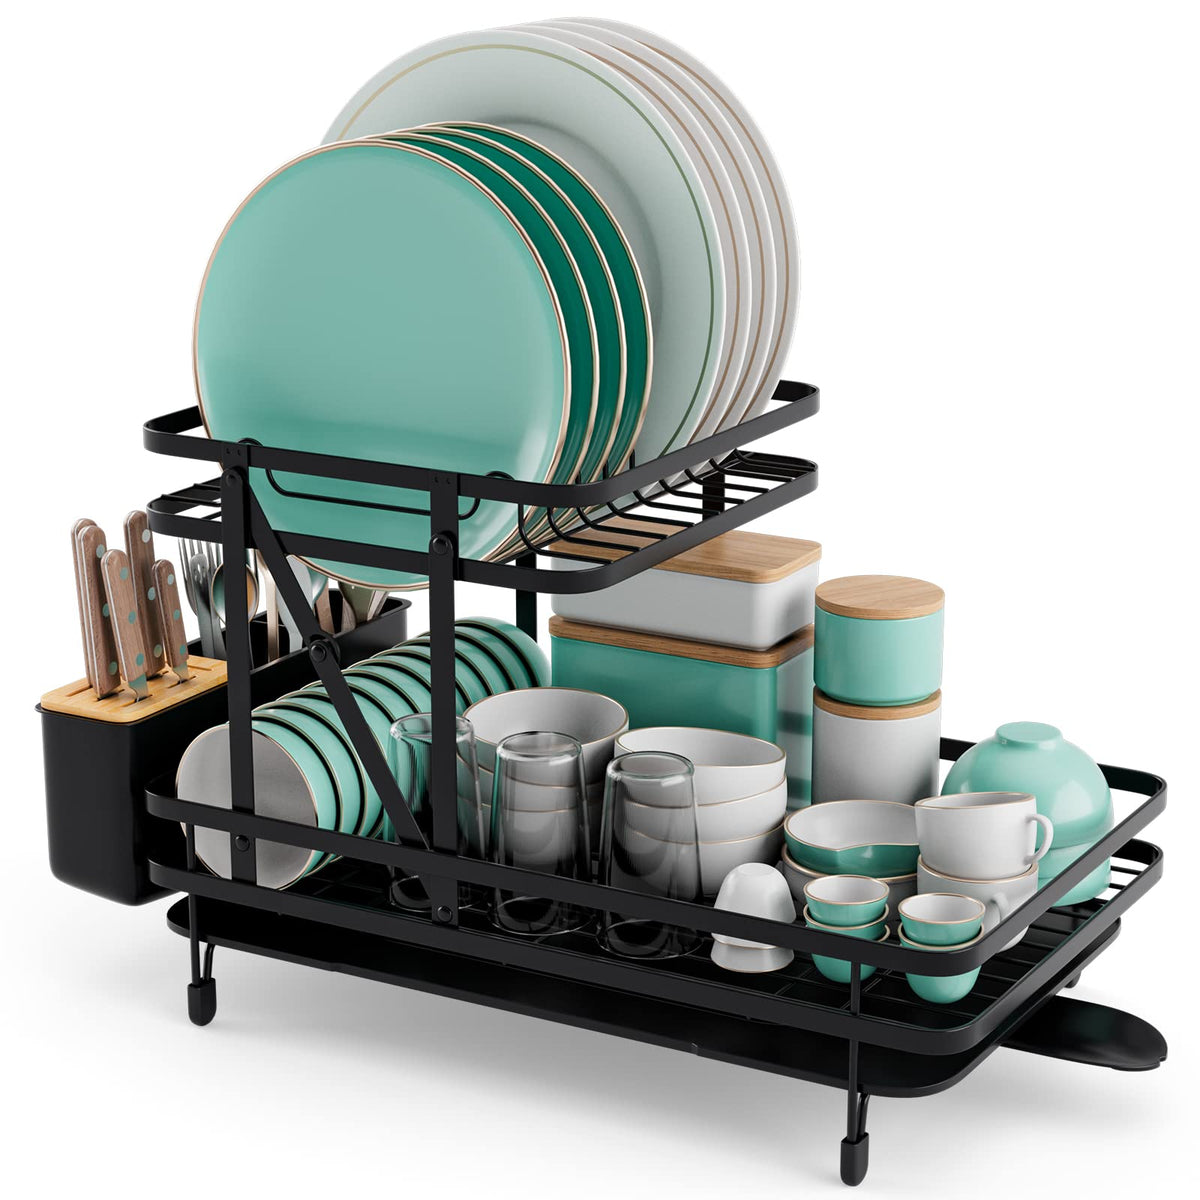 Giantex Dish Drying Rack, Collapsible 2-Tier Dish Rack and Drainboard Set with Removable Drip Tray